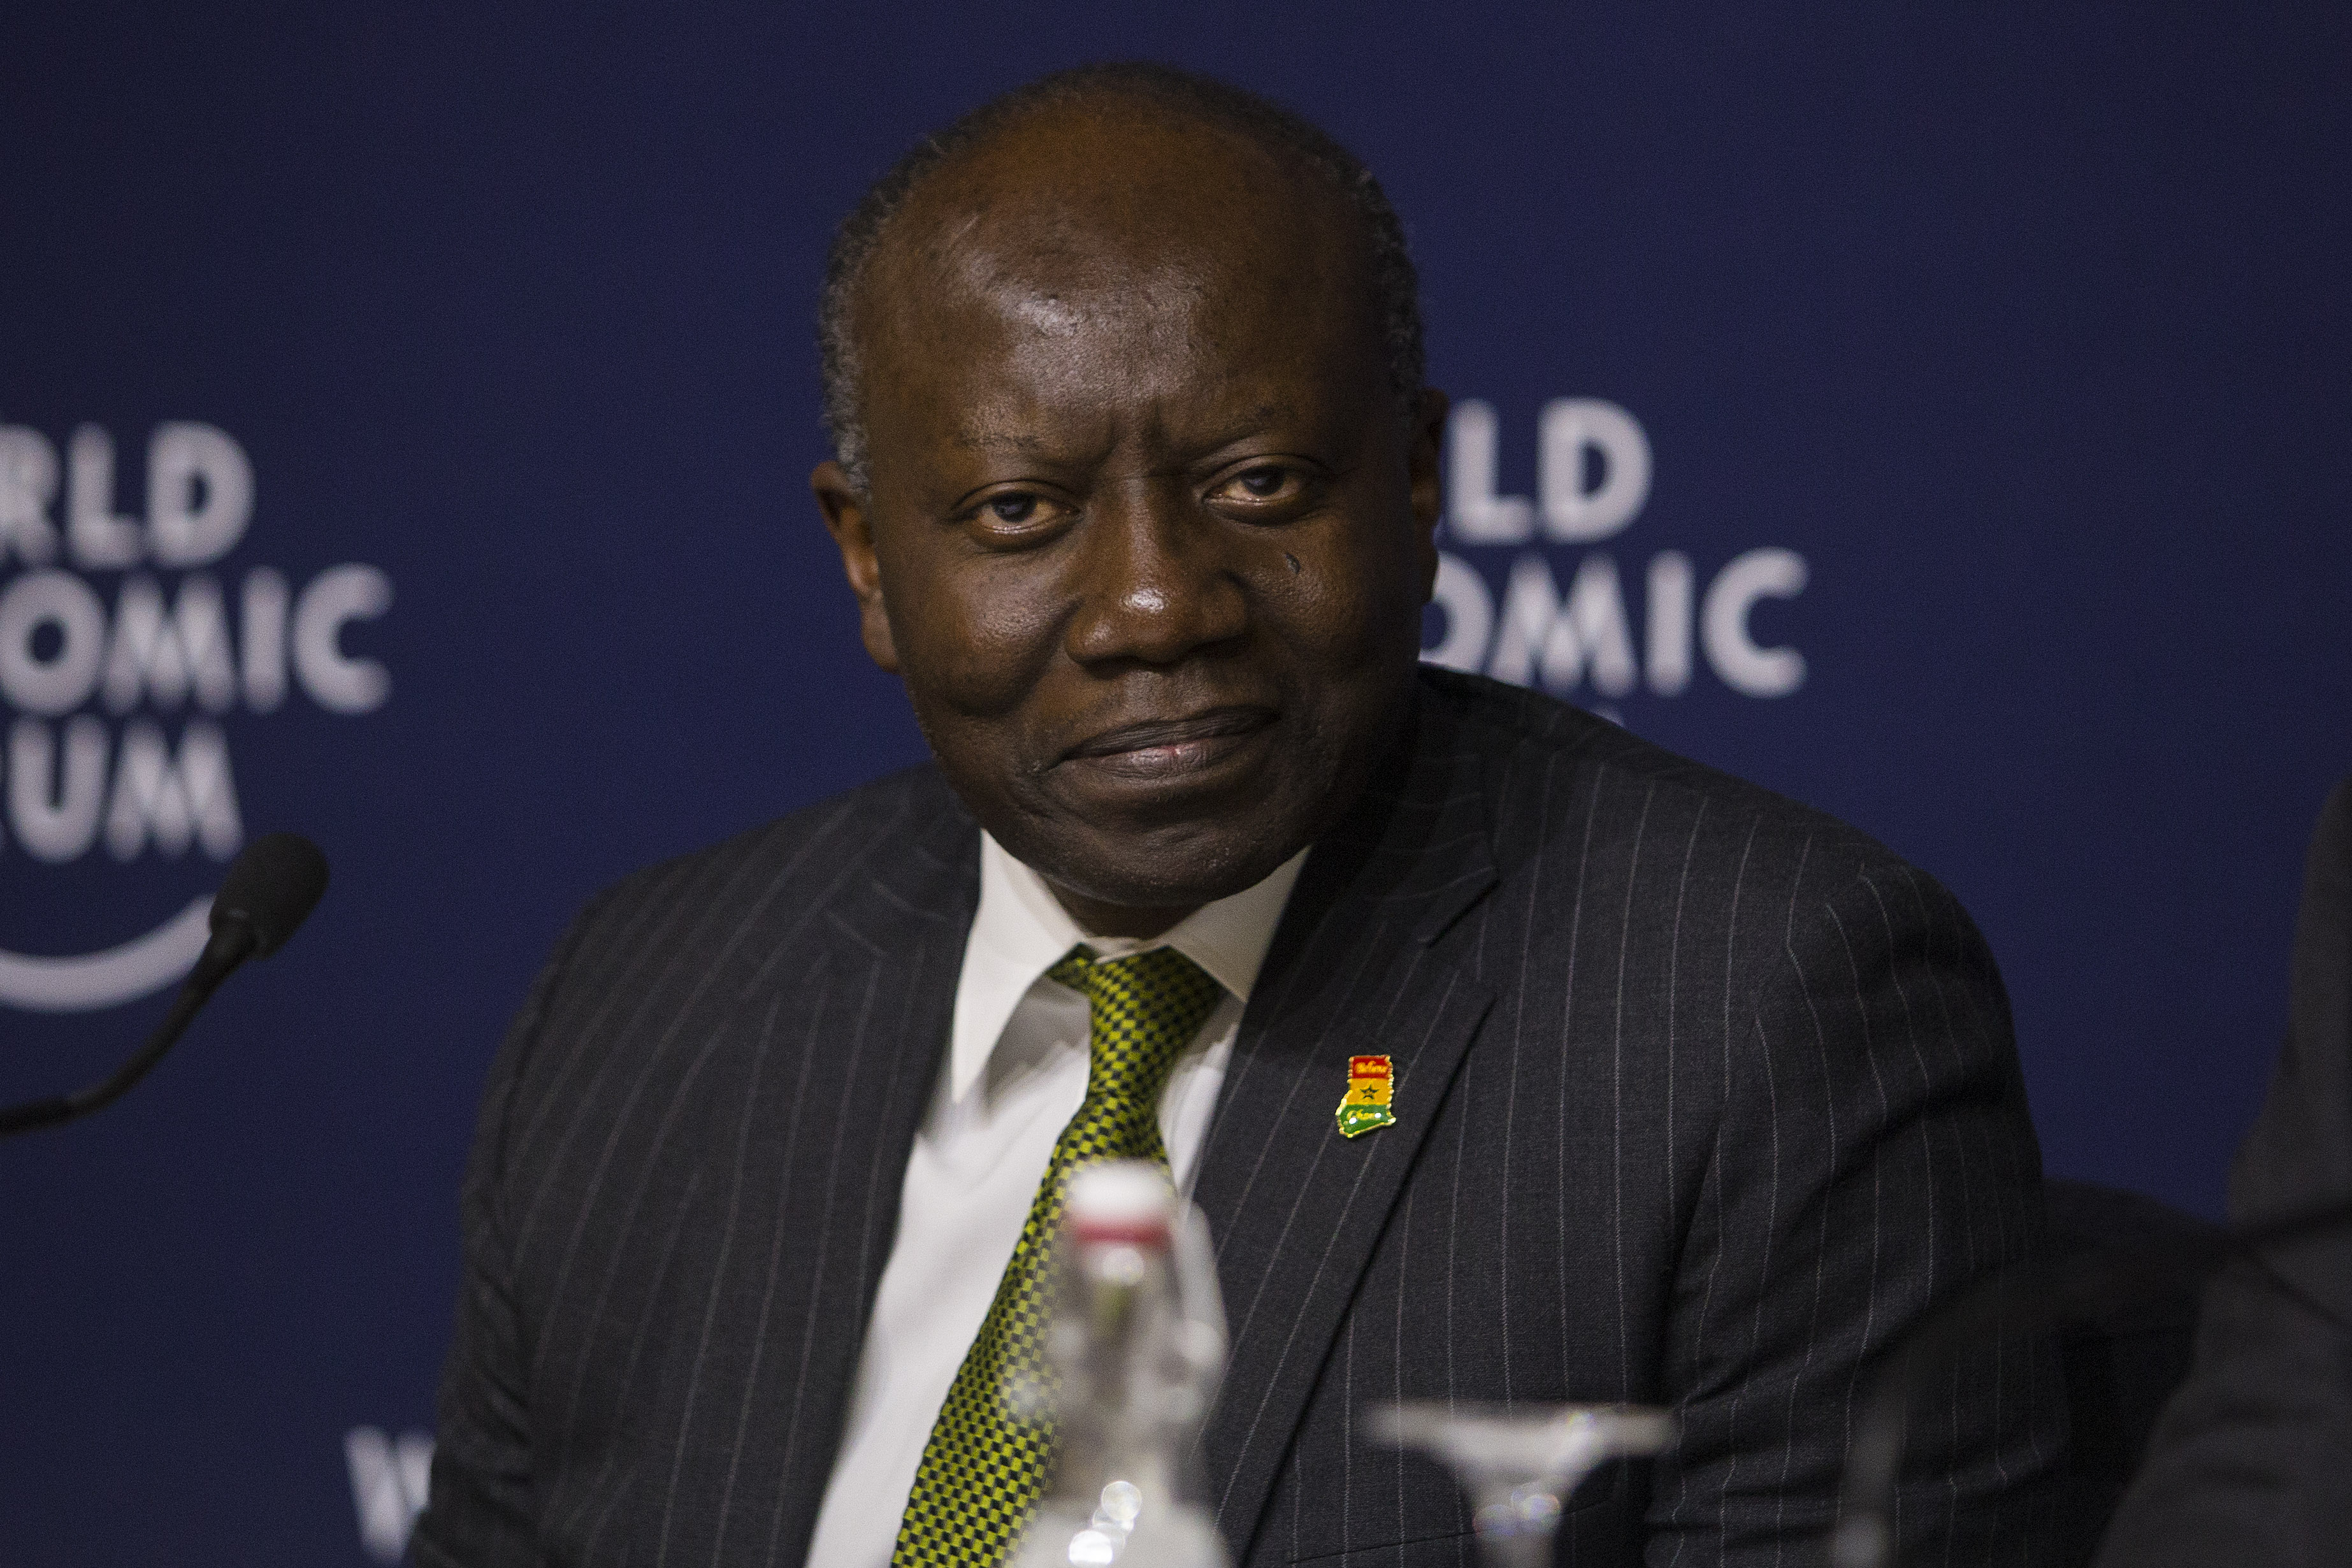 Ghana among African countries on World Bank's heavily indebted poor countries list